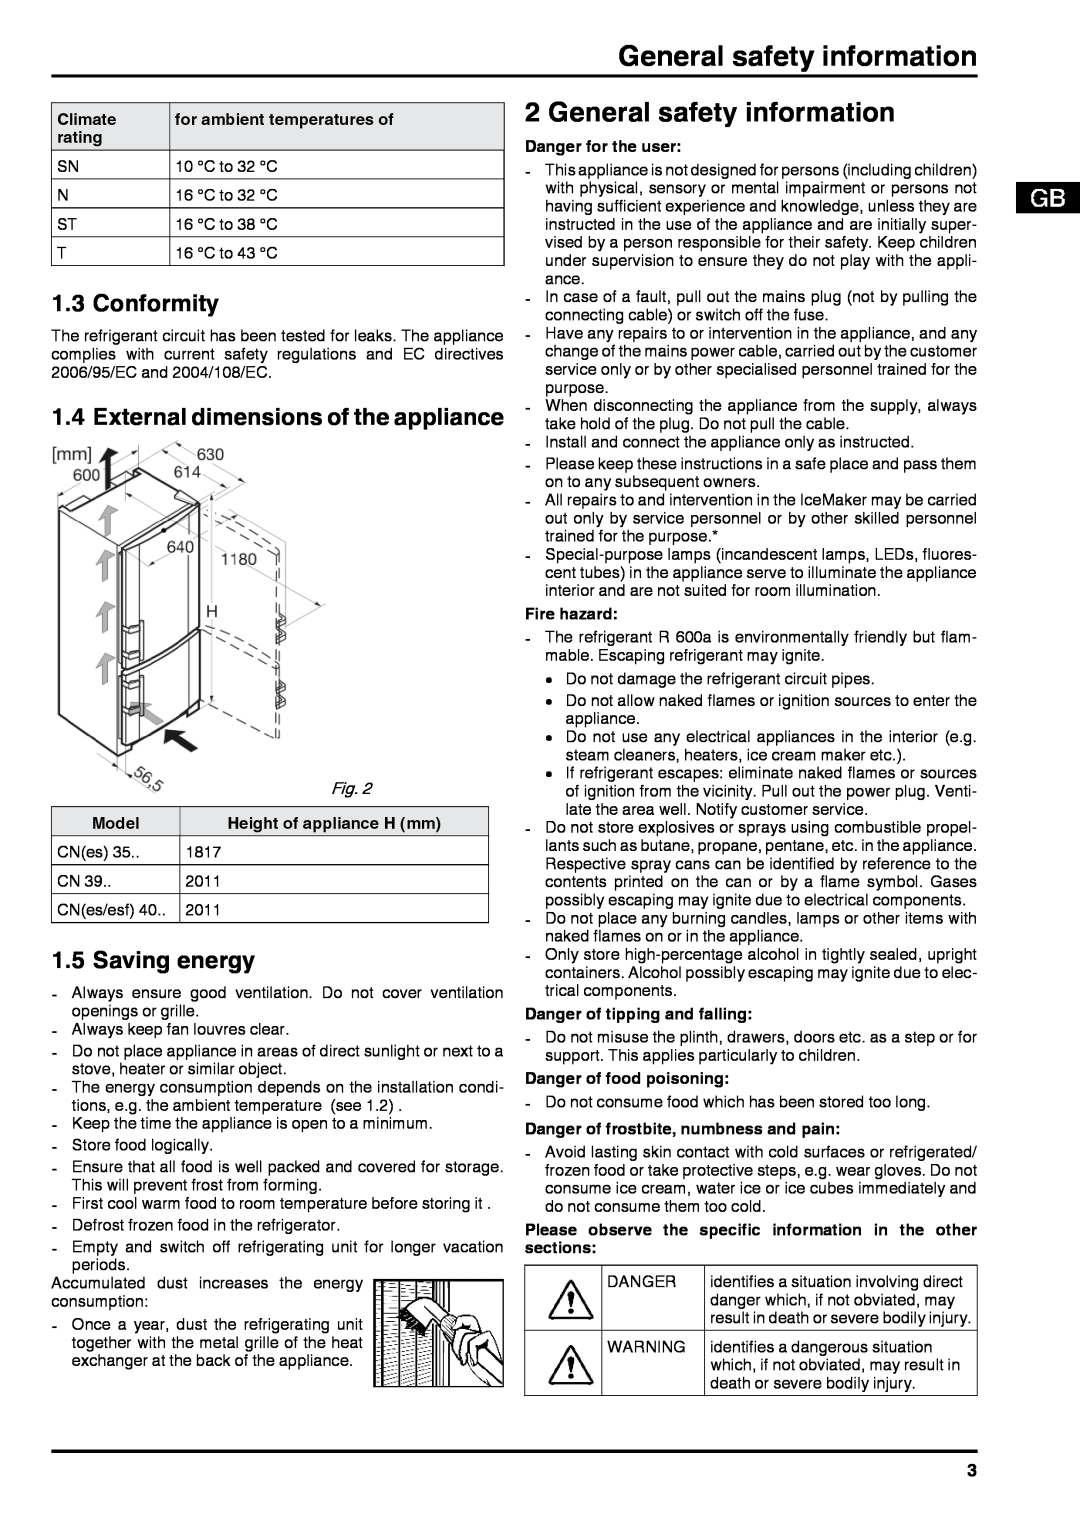 Liebherr 7084376 - 03 General safety information, Conformity, External dimensions of the appliance, Saving energy, Climate 